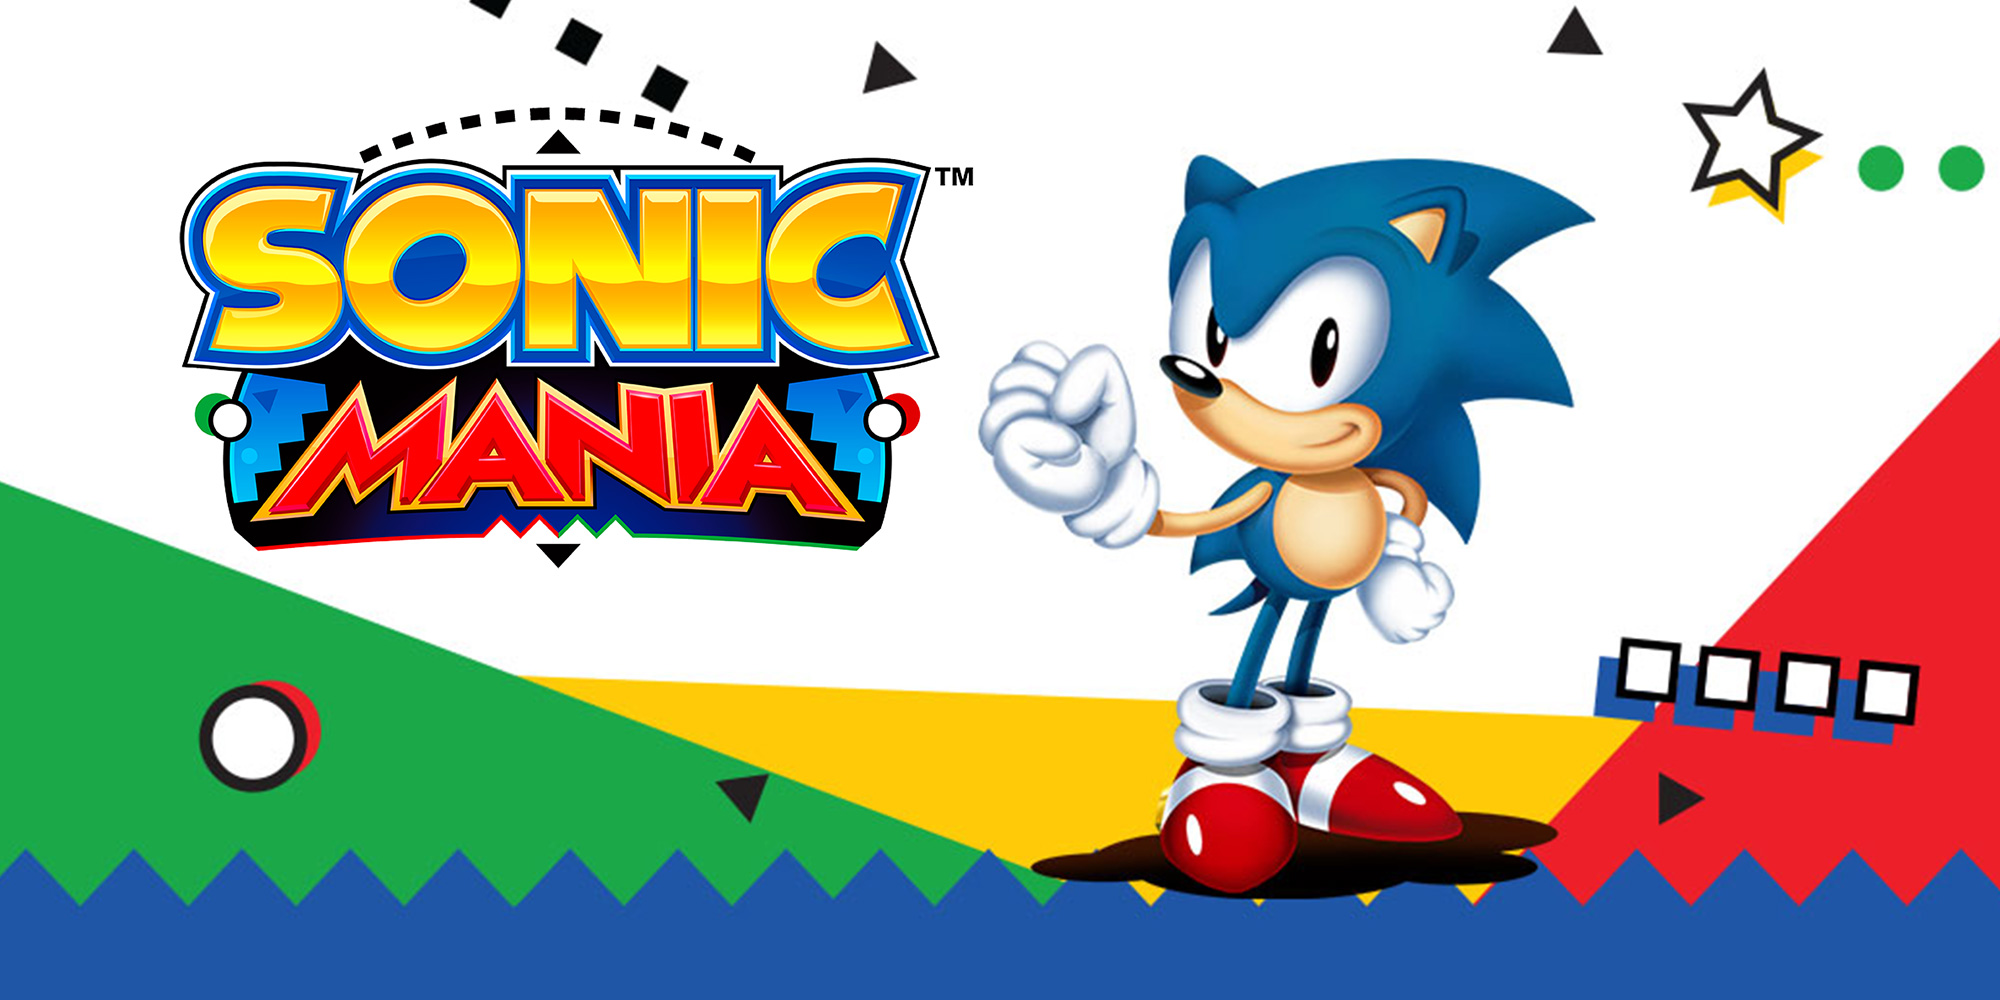 General 2000x1000 Sonic Sonic the Hedgehog Sonic Mania Adventures Sonic Mania Sega Mighty Tails (character) Knuckles comic art video game art PC gaming fox Mania digital art